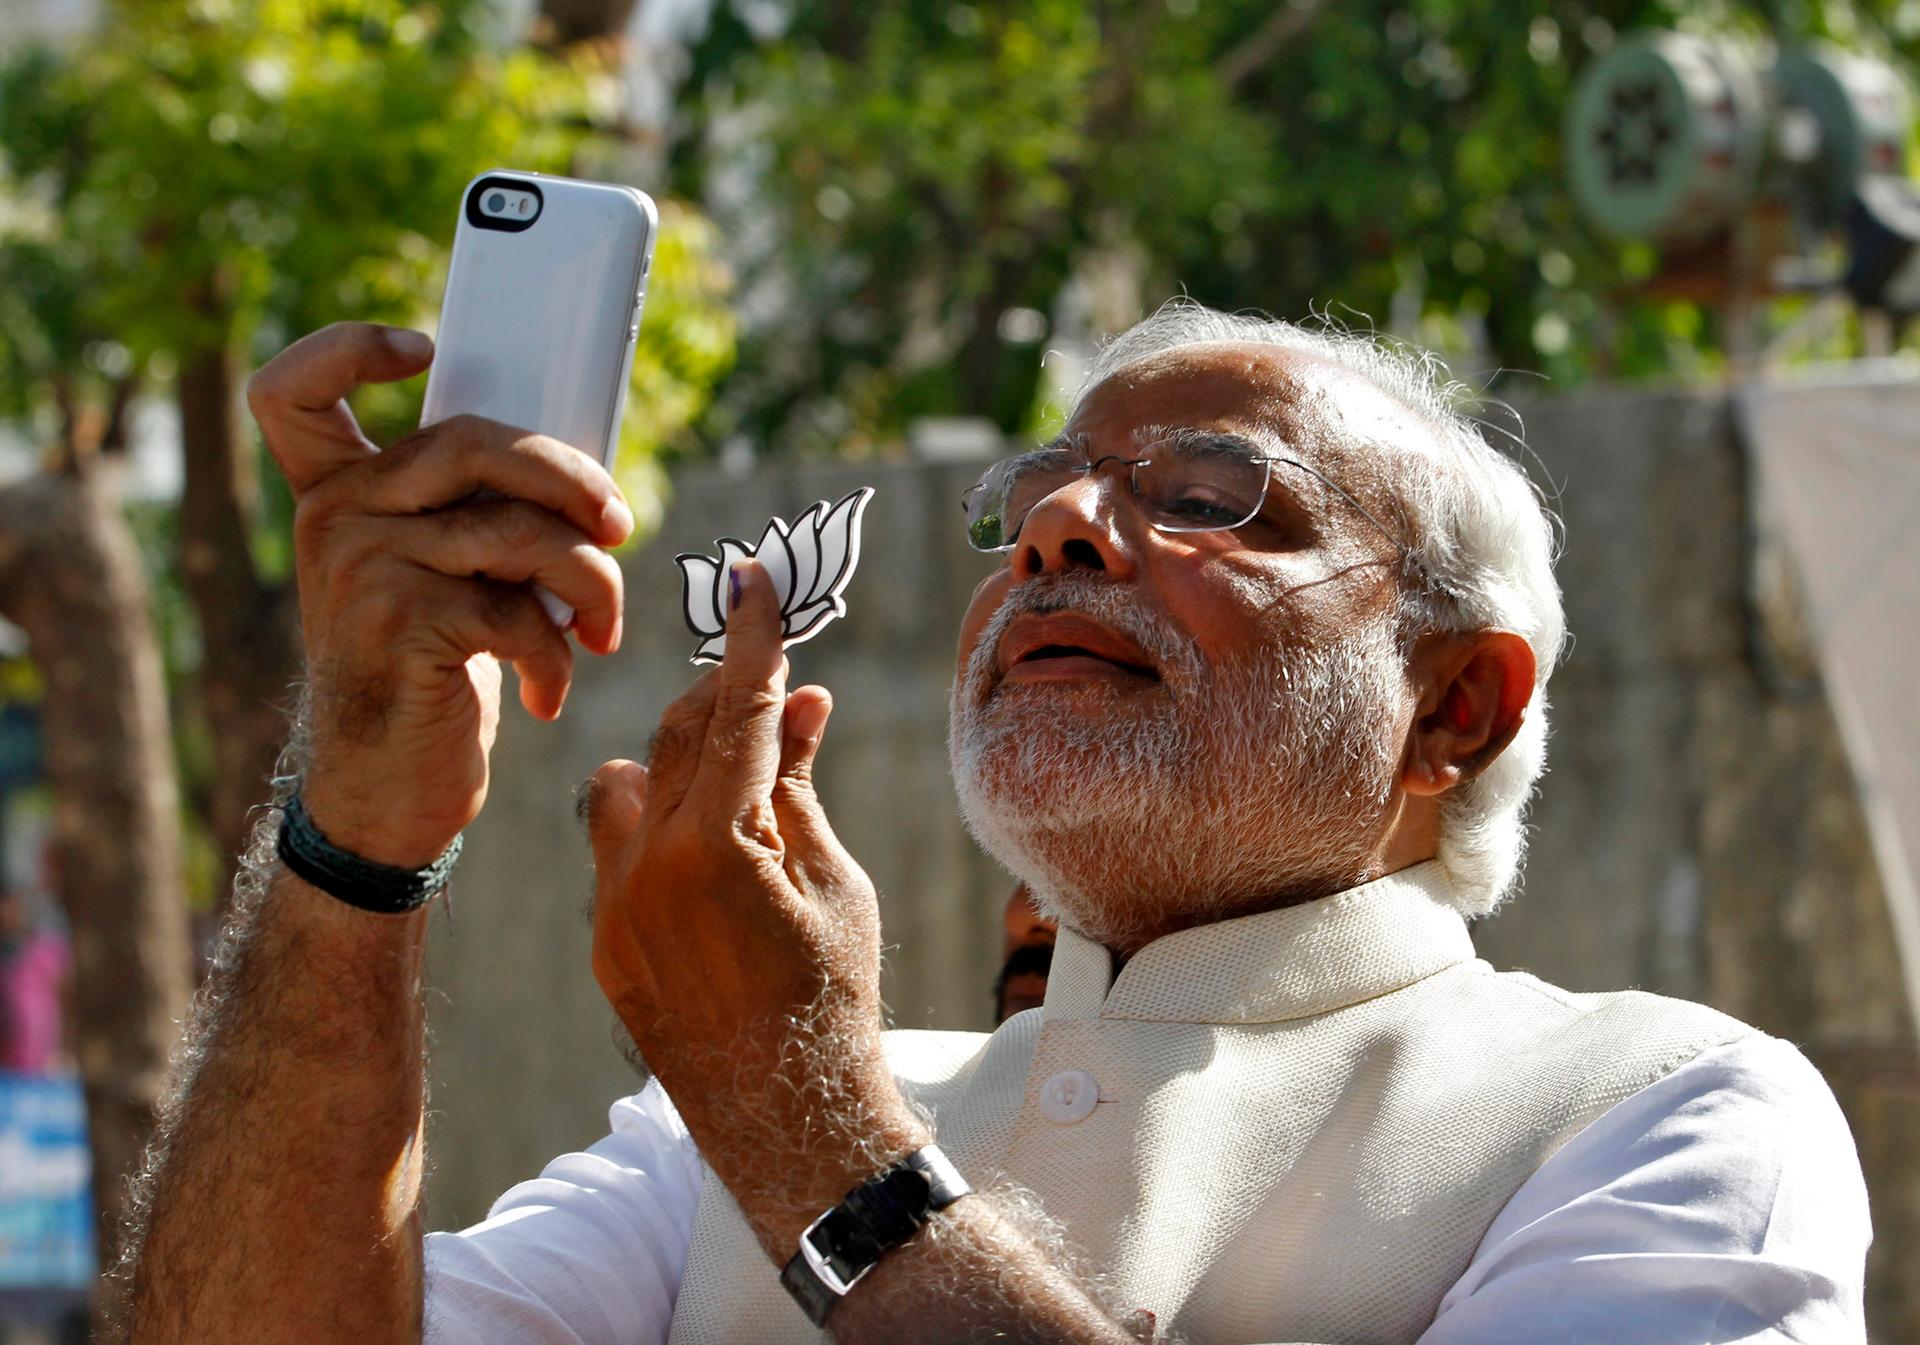 Hindu nationalist Narendra Modi, the prime ministerial candidate for India's main opposition Bharatiya Janata Party (BJP), takes a "selfie" after casting his vote at a polling station during the seventh phase of India's general election.